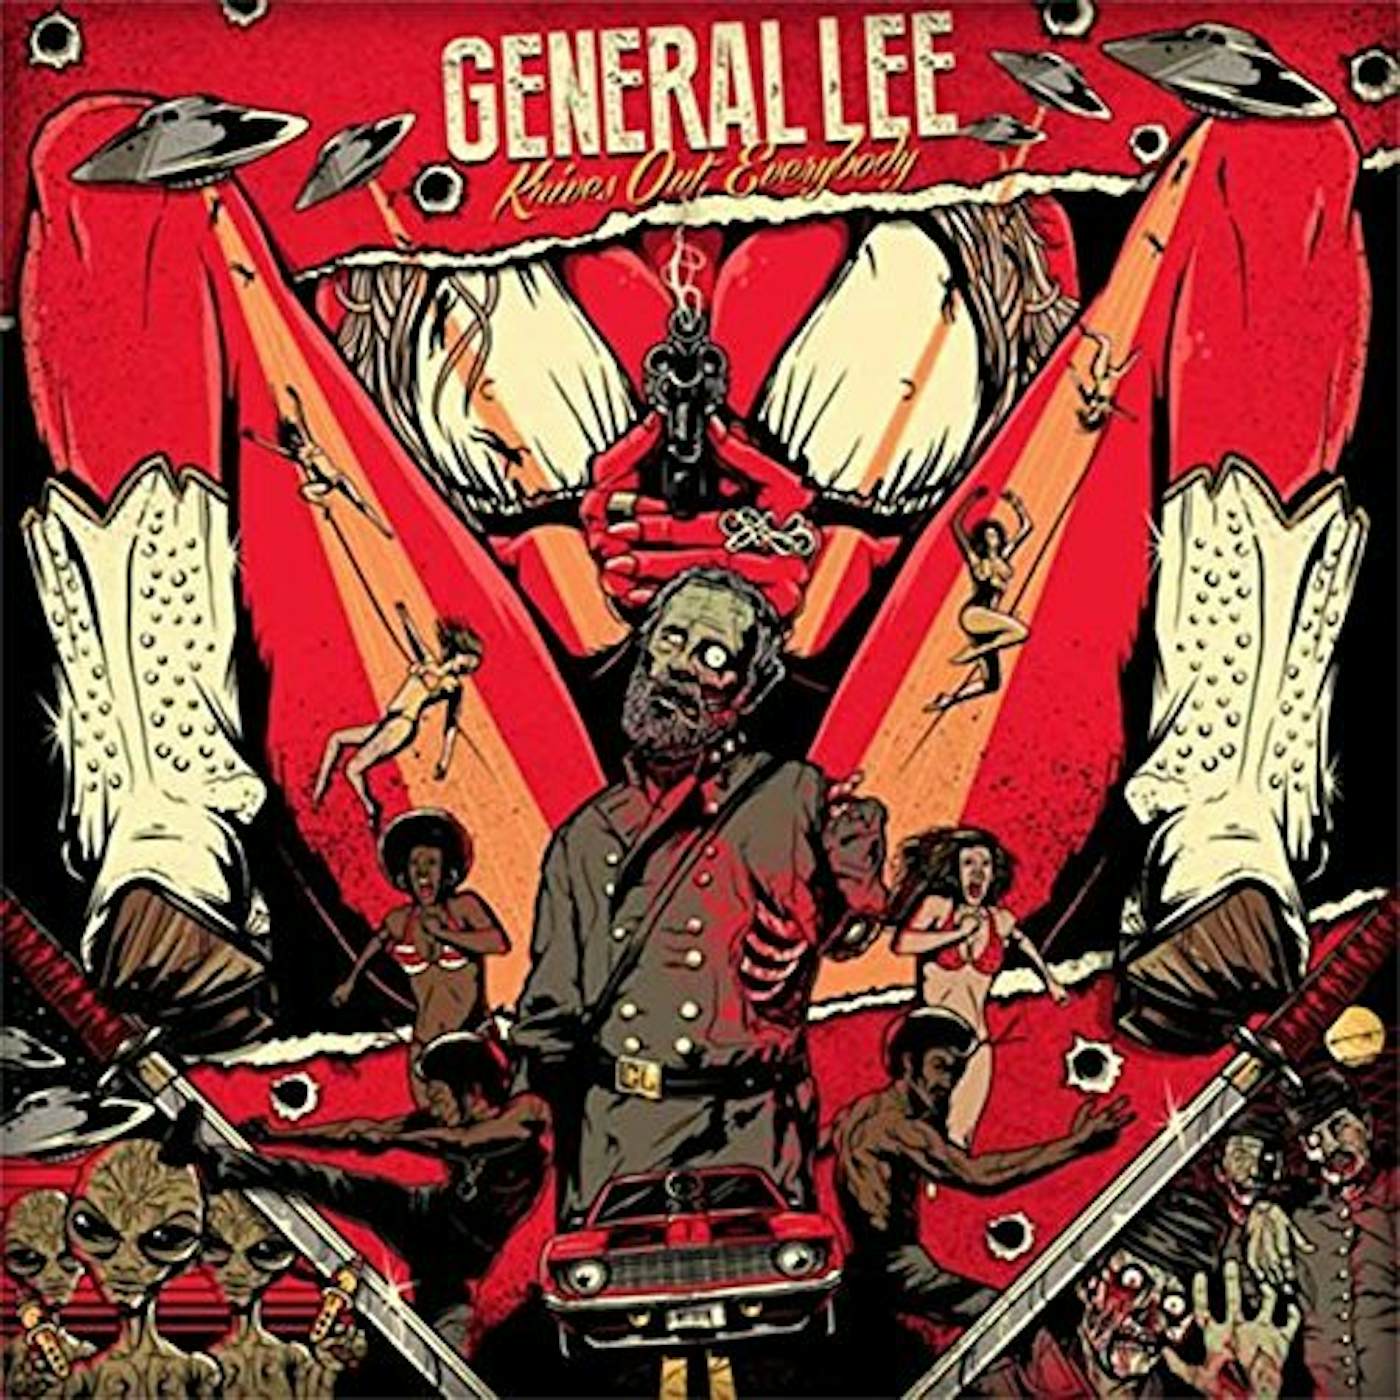 General Lee KNIVES OUT: EVERYBODY Vinyl Record